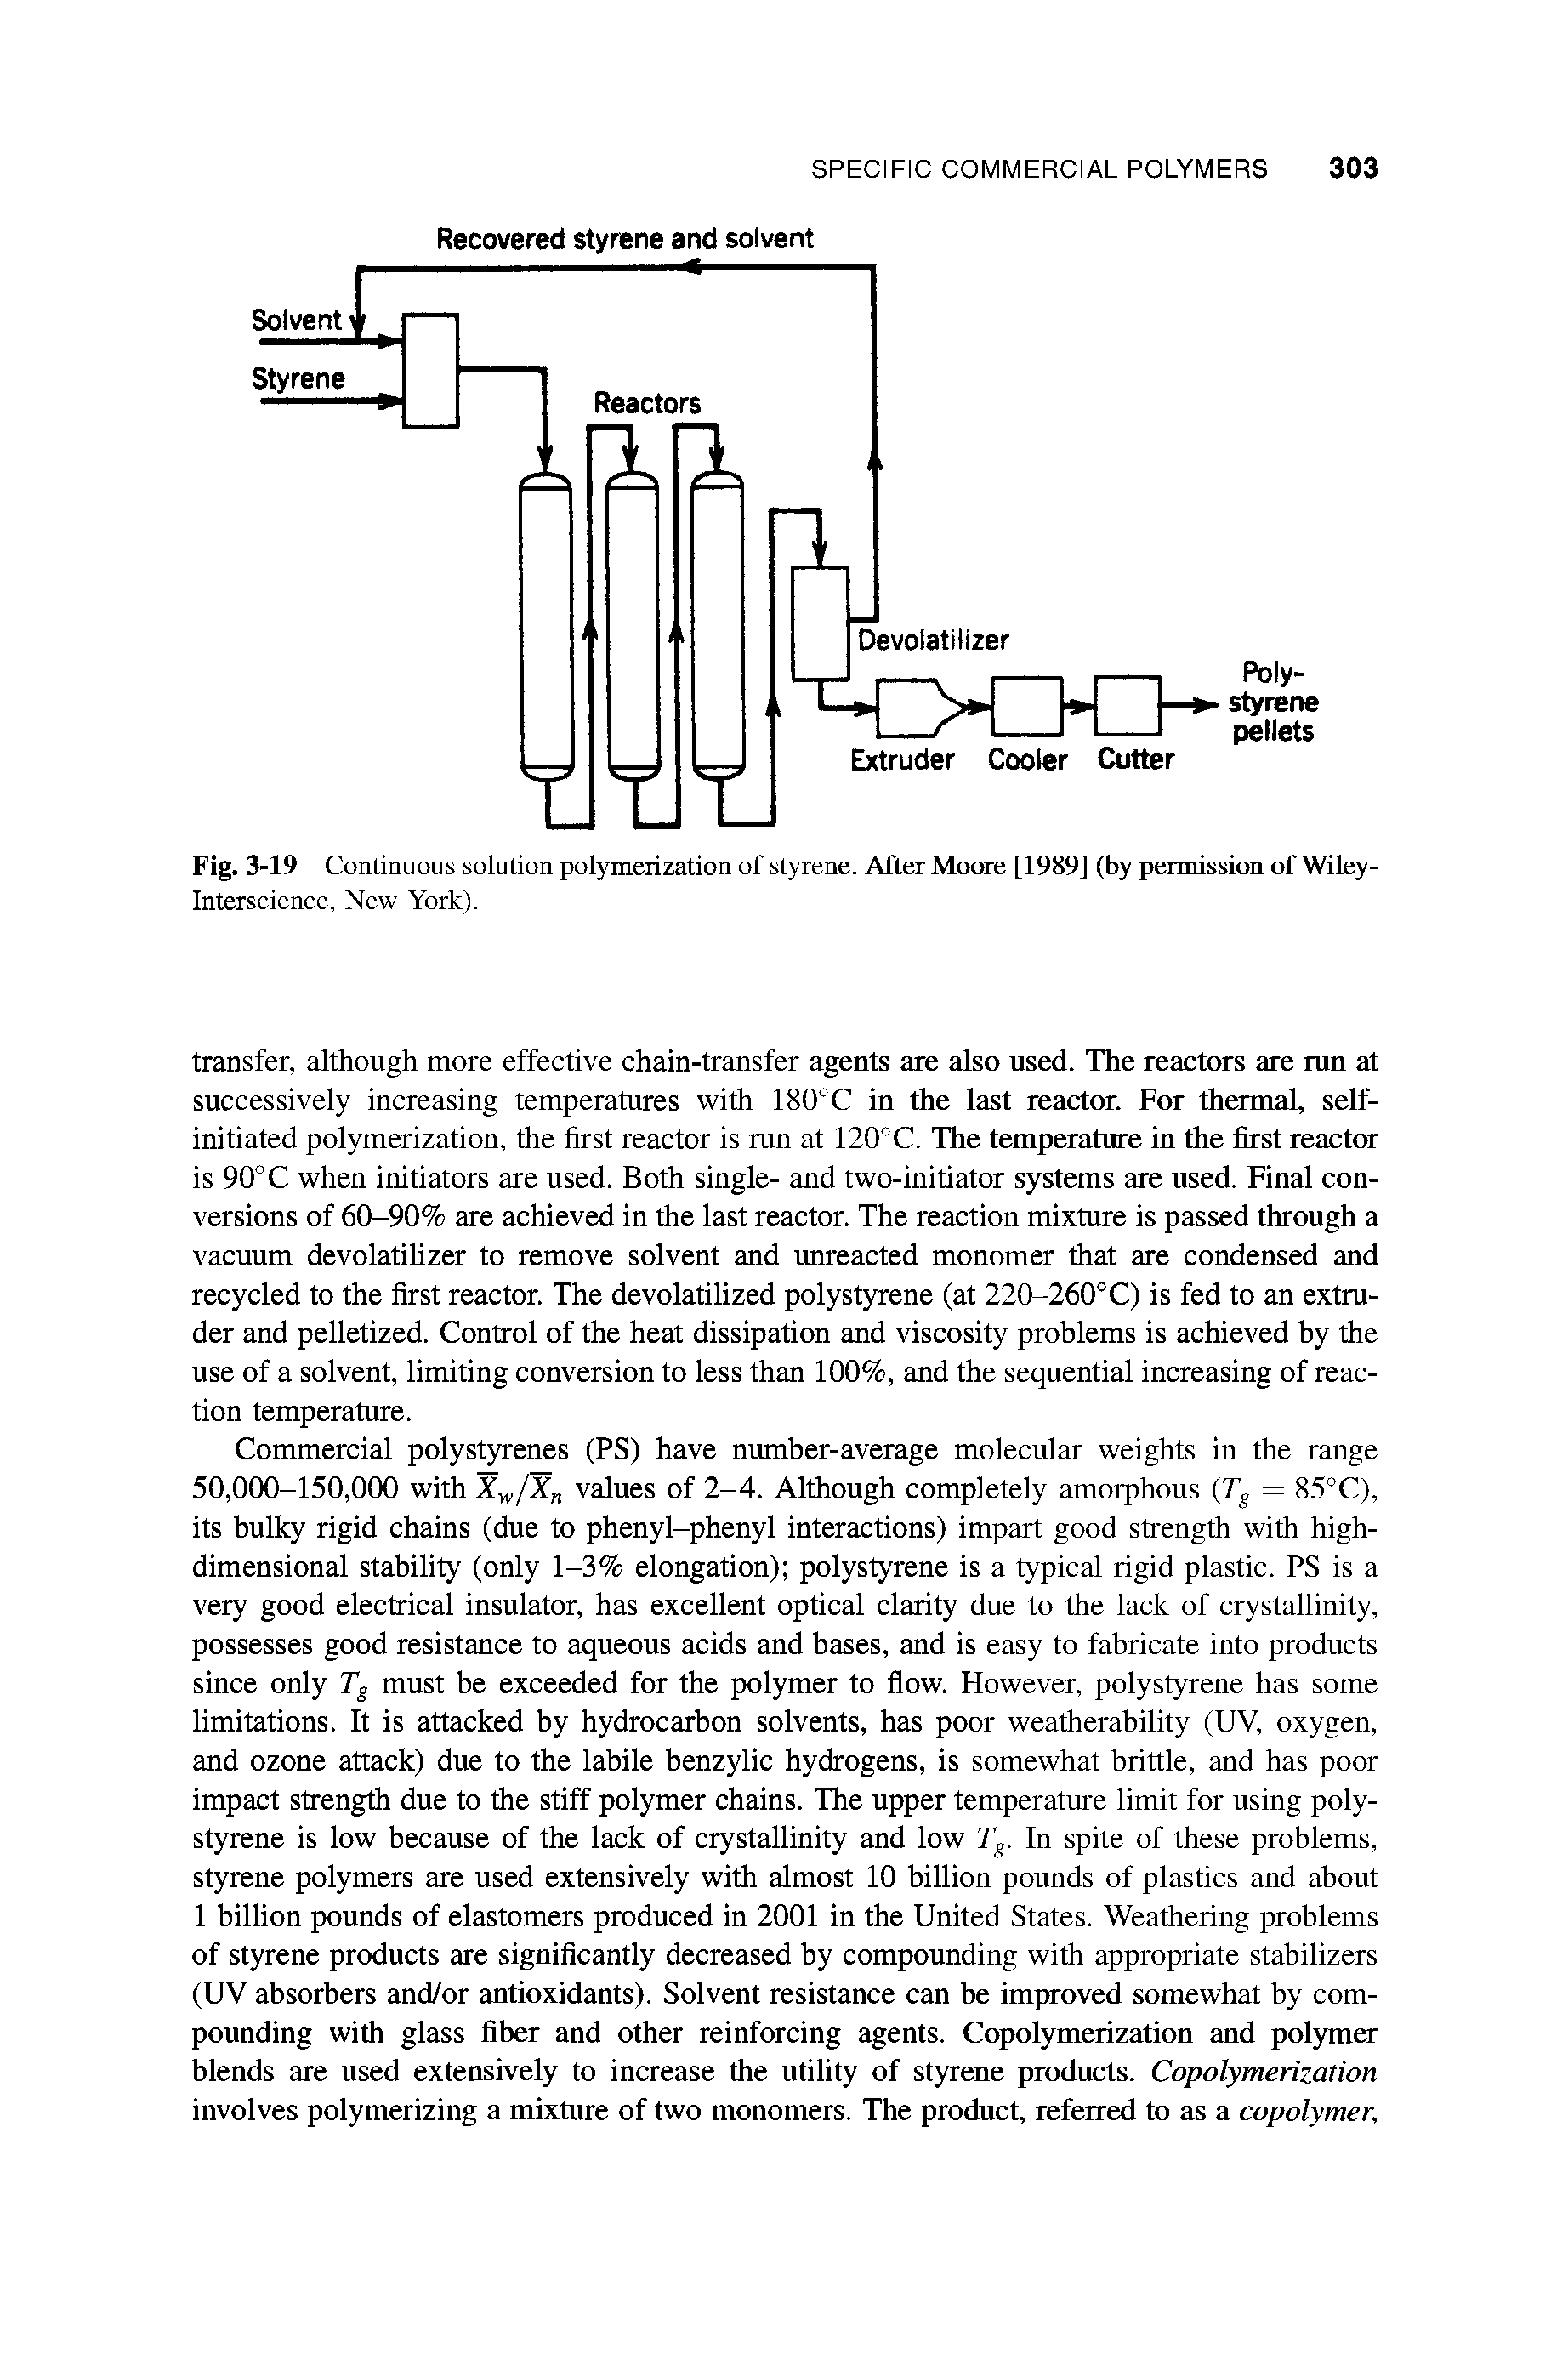 Fig. 3-19 Continuous solution polymerization of styrene. After Moore [1989] (by permission of Wiley-Interscience, New York).